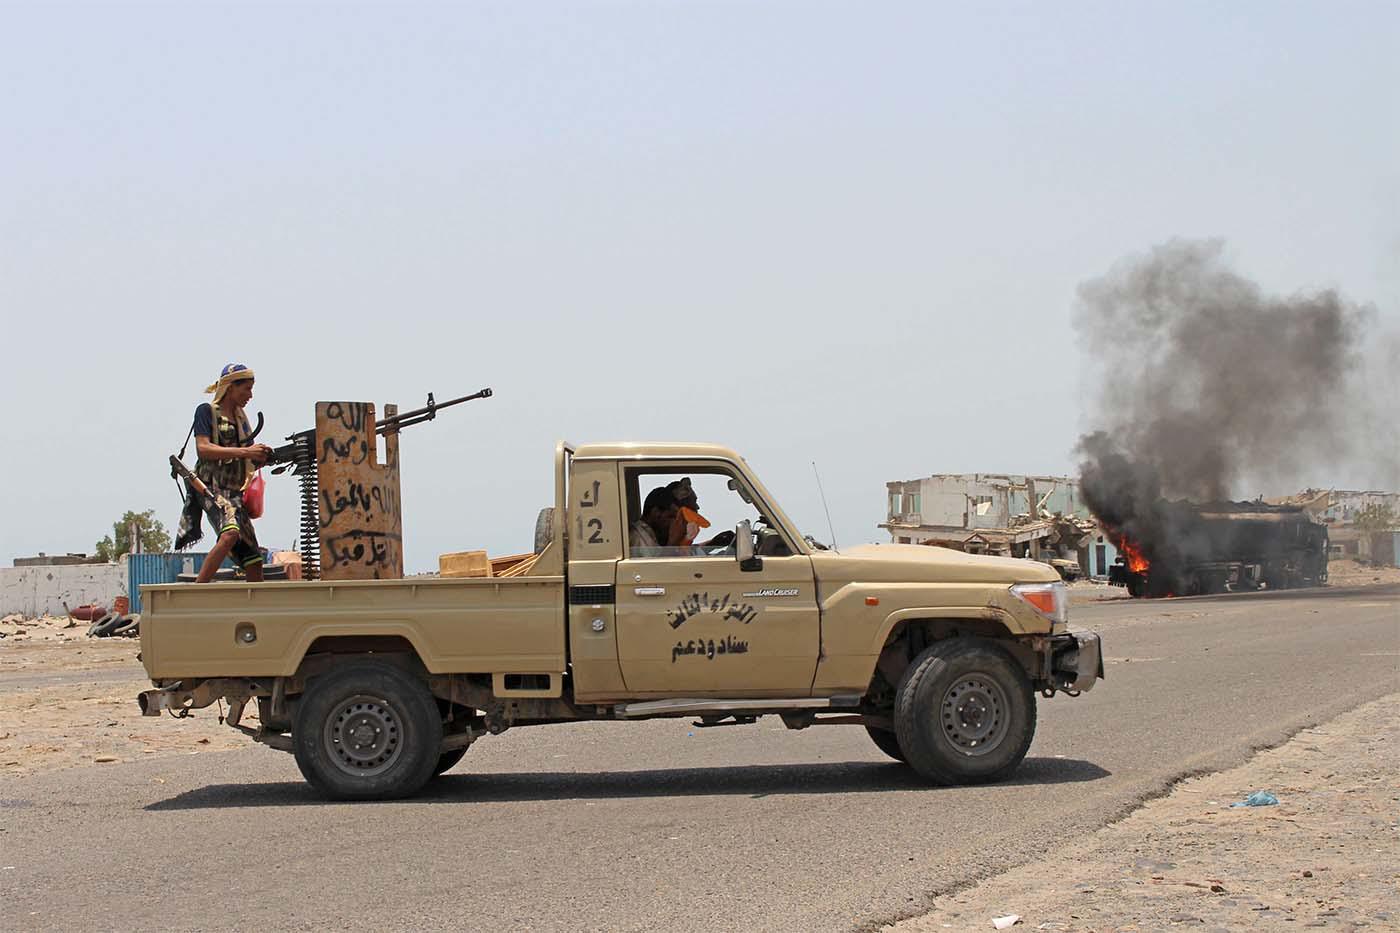 Coalition forces will be temporarily deployed in Aden